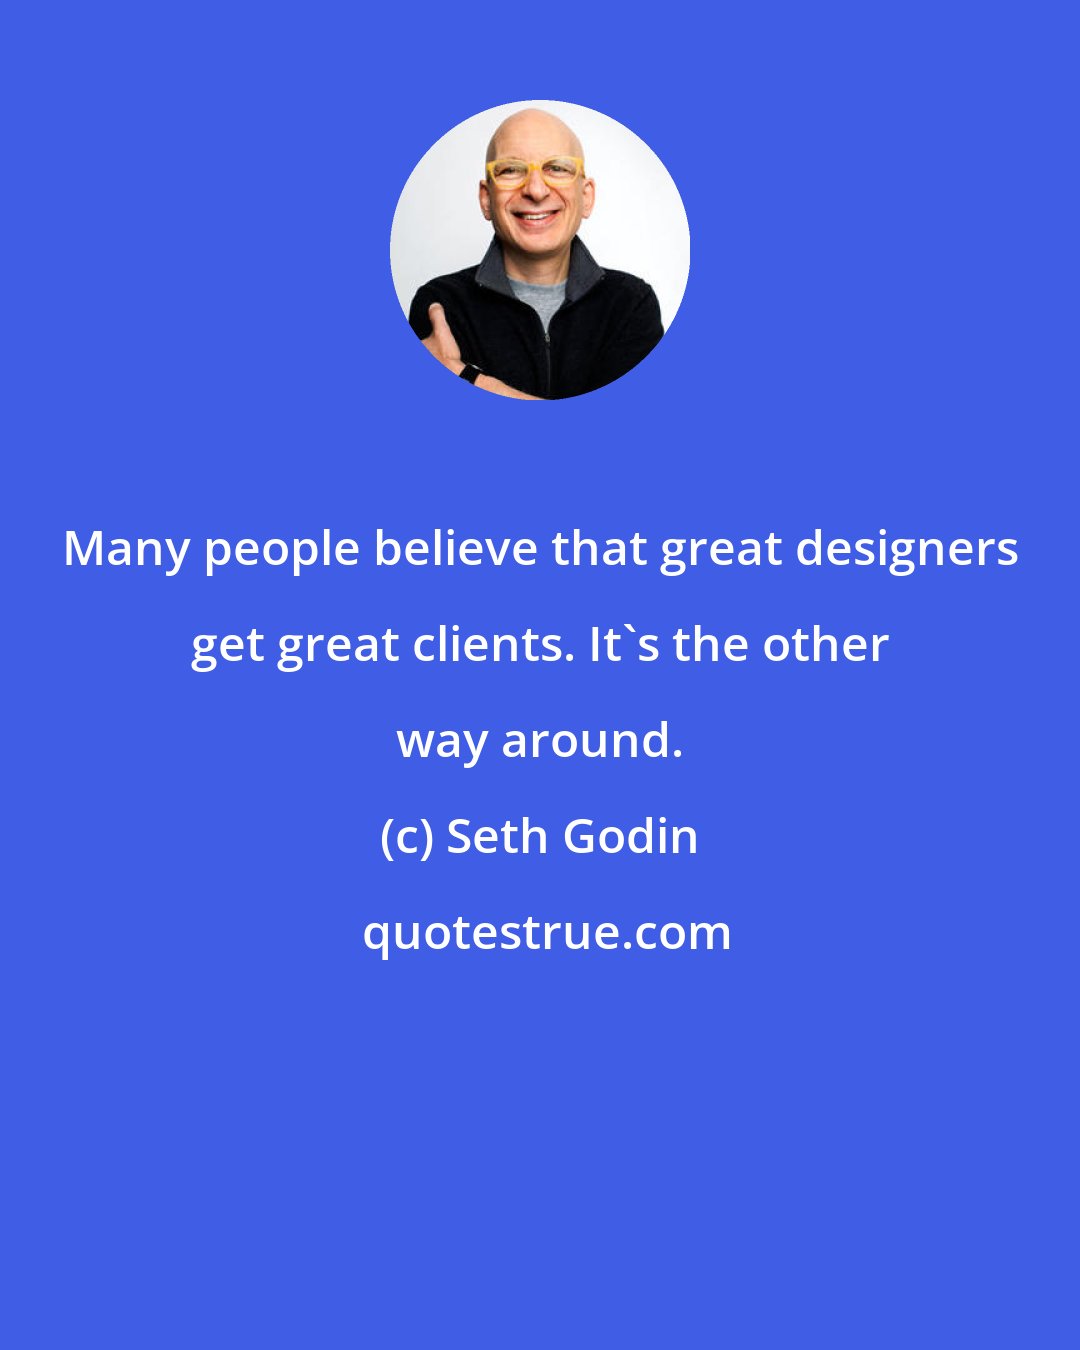 Seth Godin: Many people believe that great designers get great clients. It's the other way around.